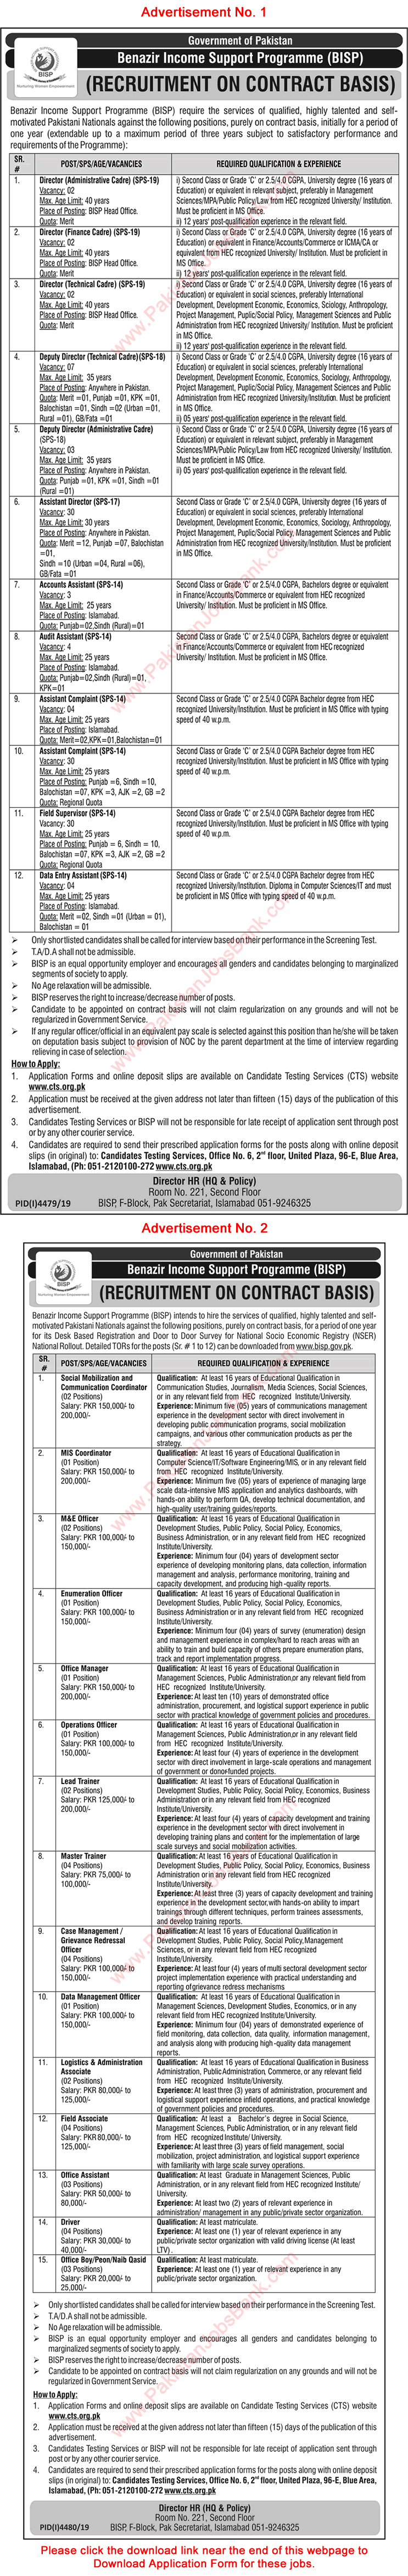 BISP Jobs 2020 February CTS Application Form Benazir Income Support Programme Latest